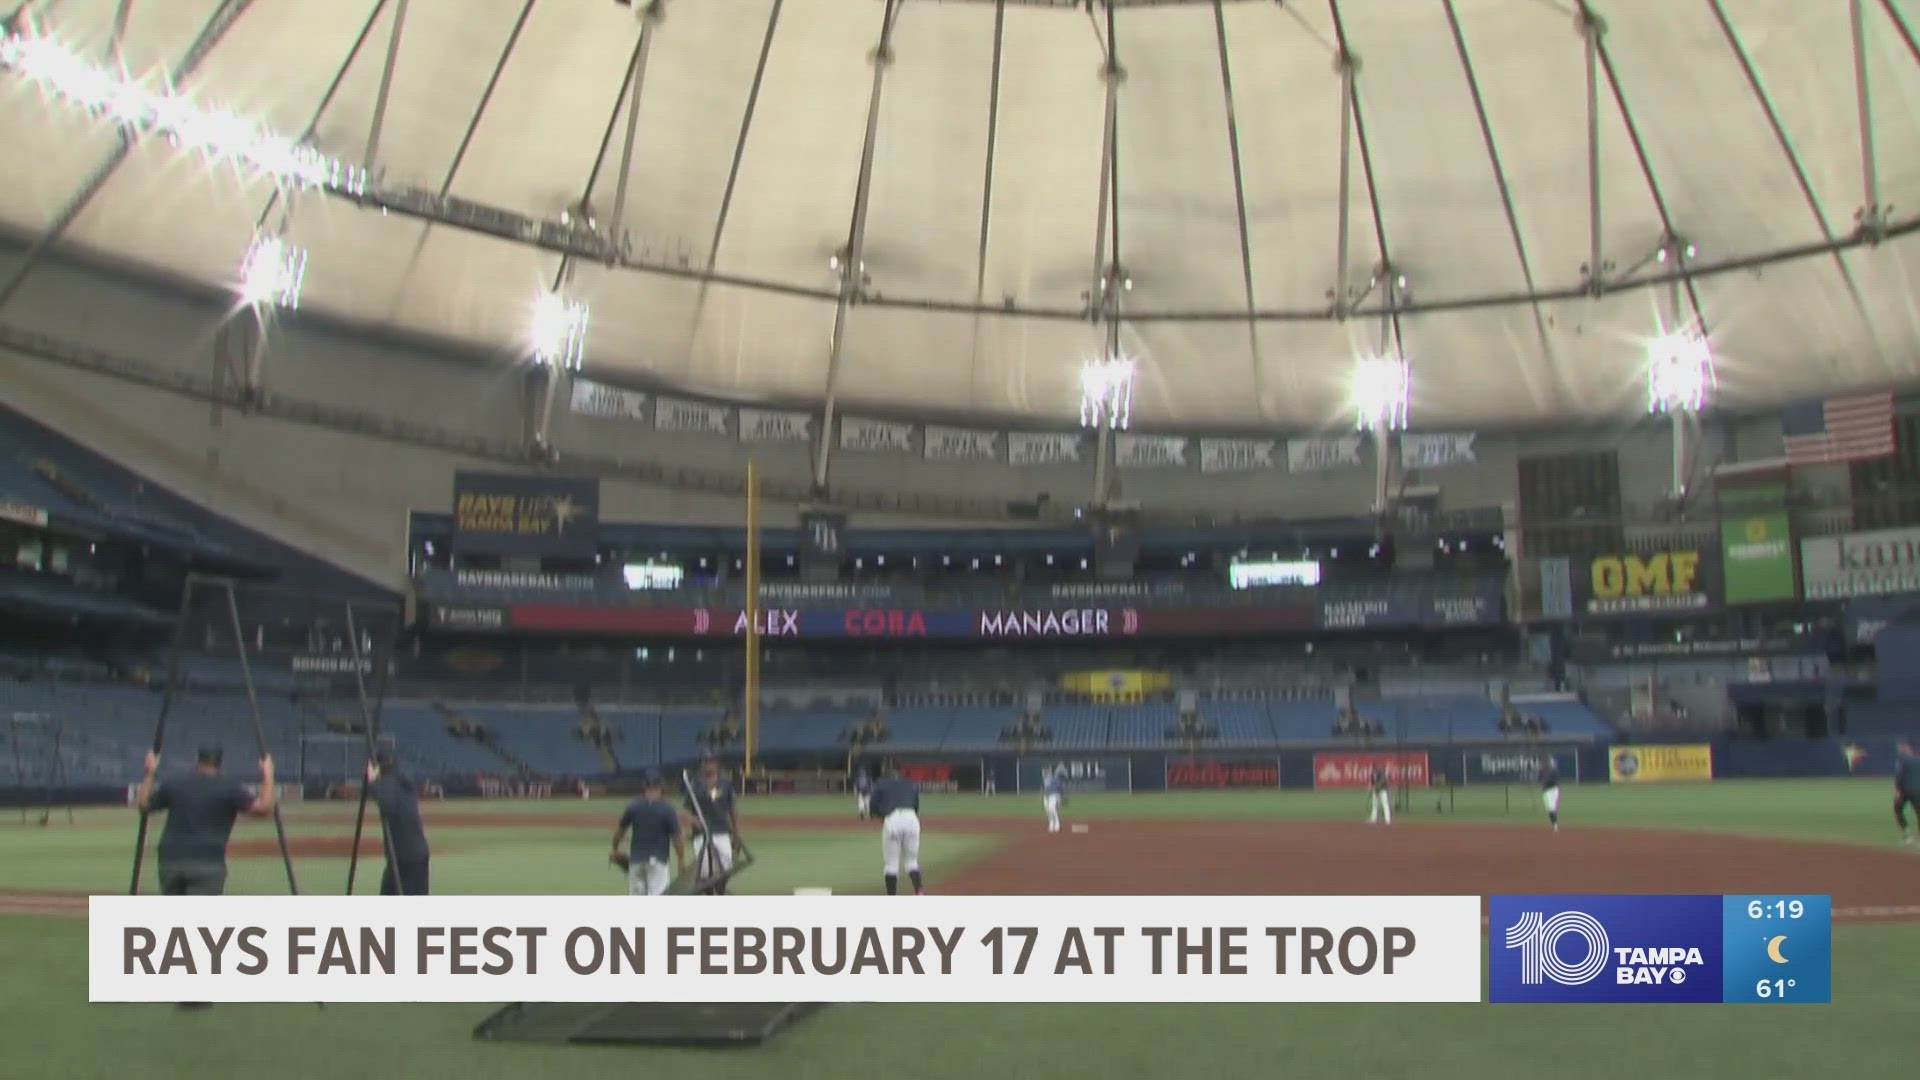 The event runs at Tropicana Field on Saturday, Feb. 17, from 1 p.m.-5p.m.